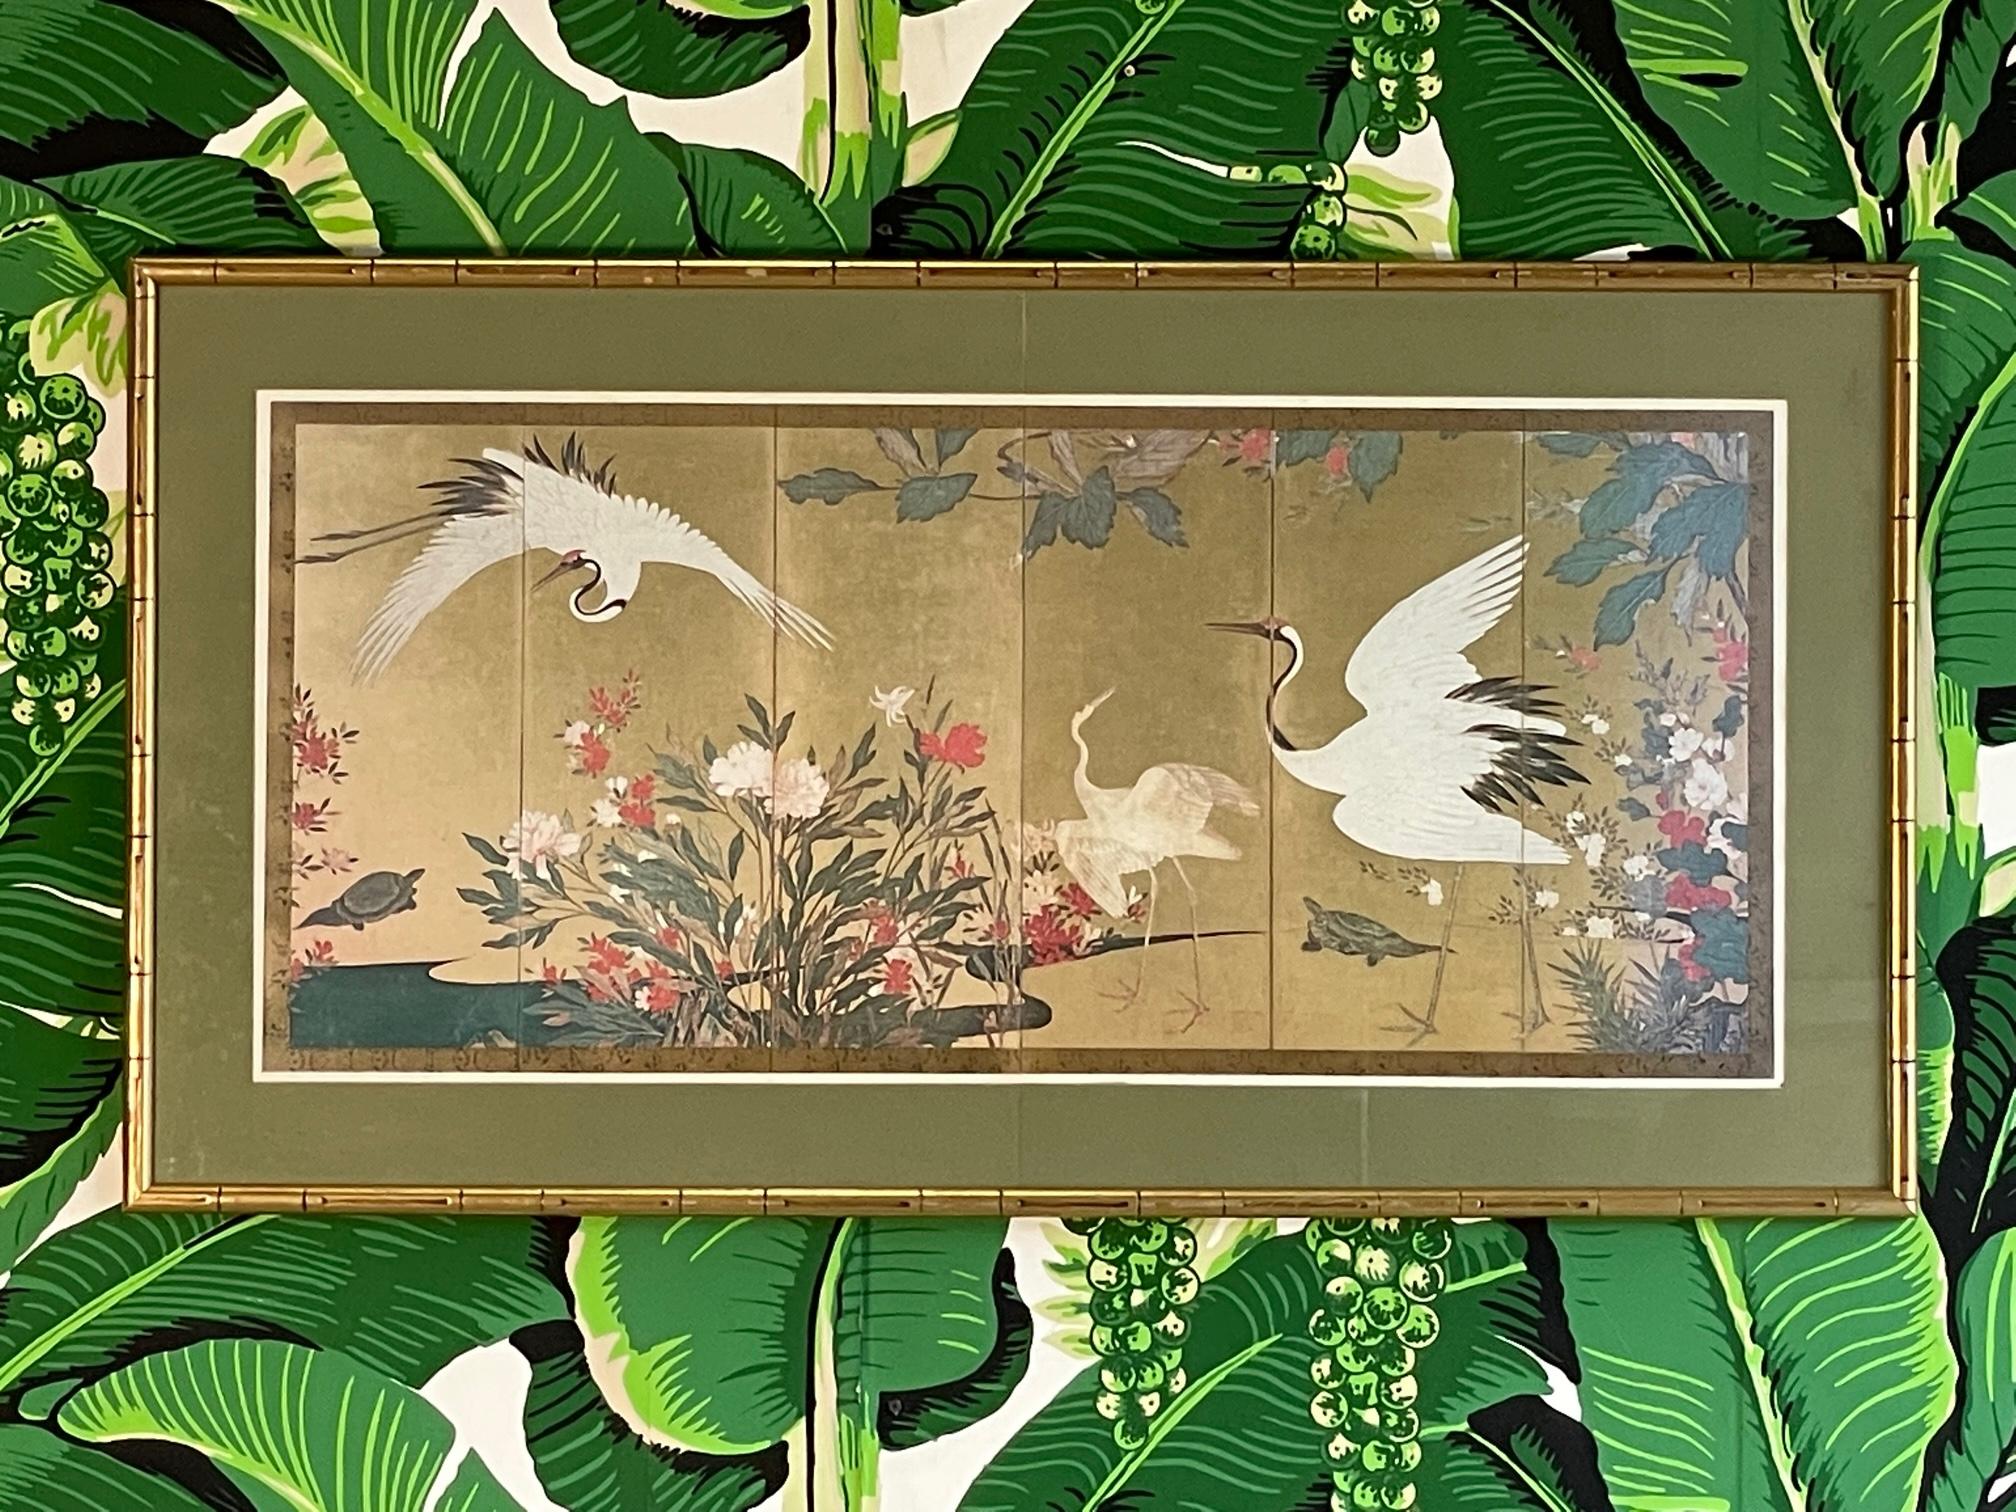 Framed print of Japanese art featuring cranes and flora estimated circa late 16th or early 17th century. Framed in gold gilt faux bamboo carved wood. Good condition with imperfections consistent with age, see photos for condition details.
For a